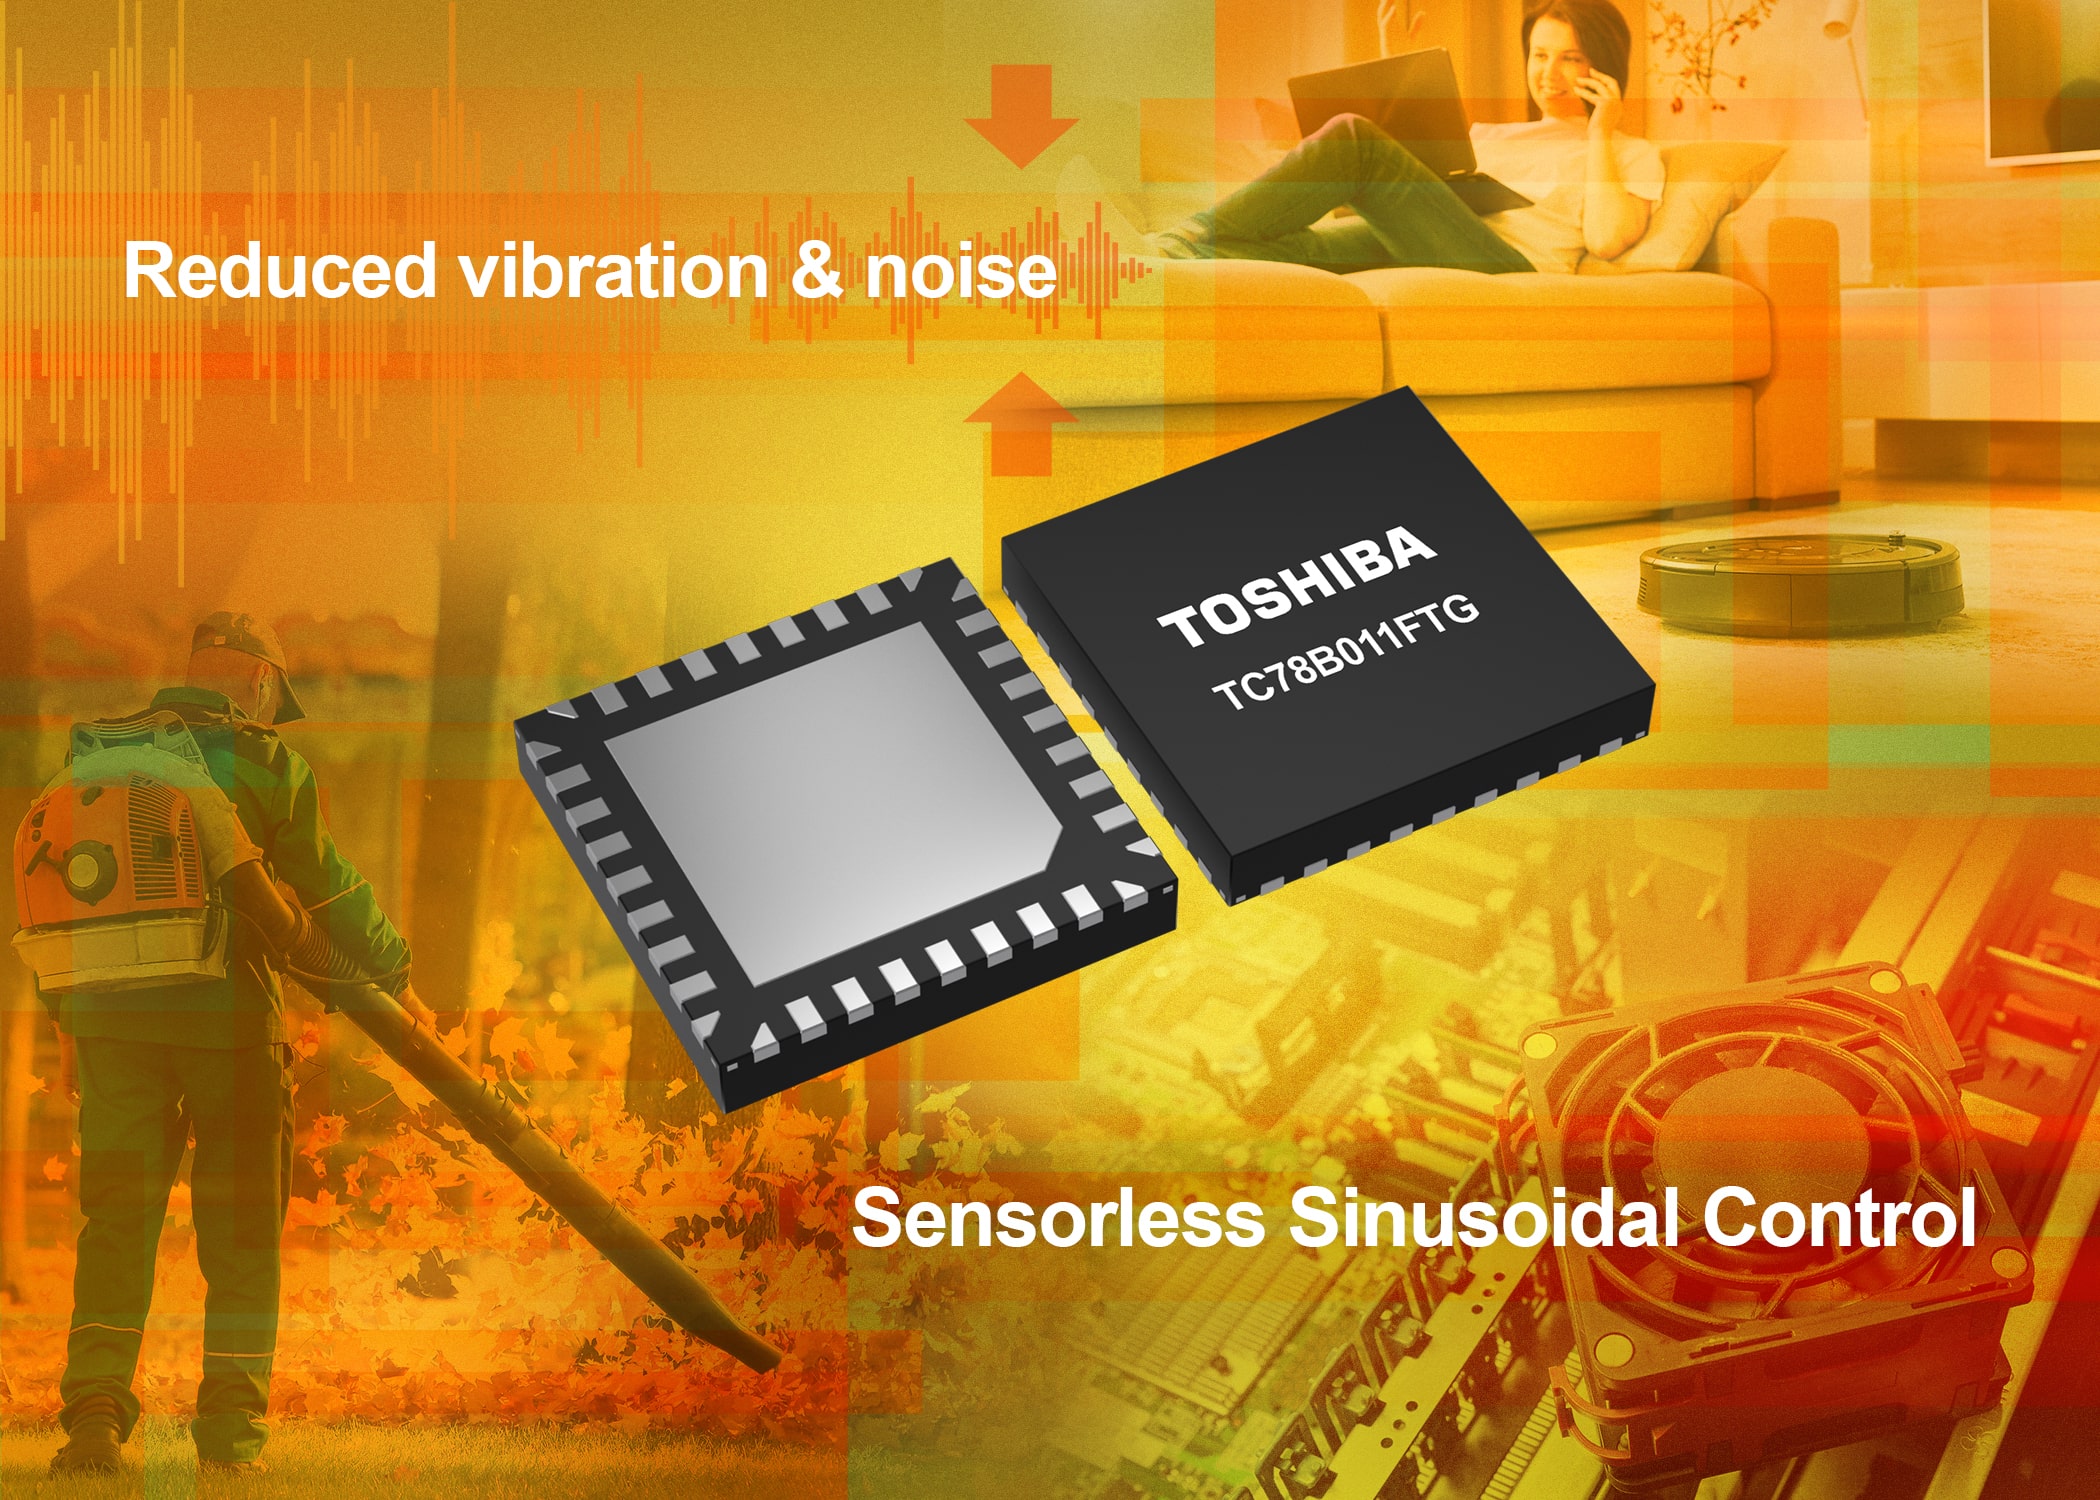 Toshiba announces three-phase BLDC pre-driver IC featuring sensorless sine-wave motor control